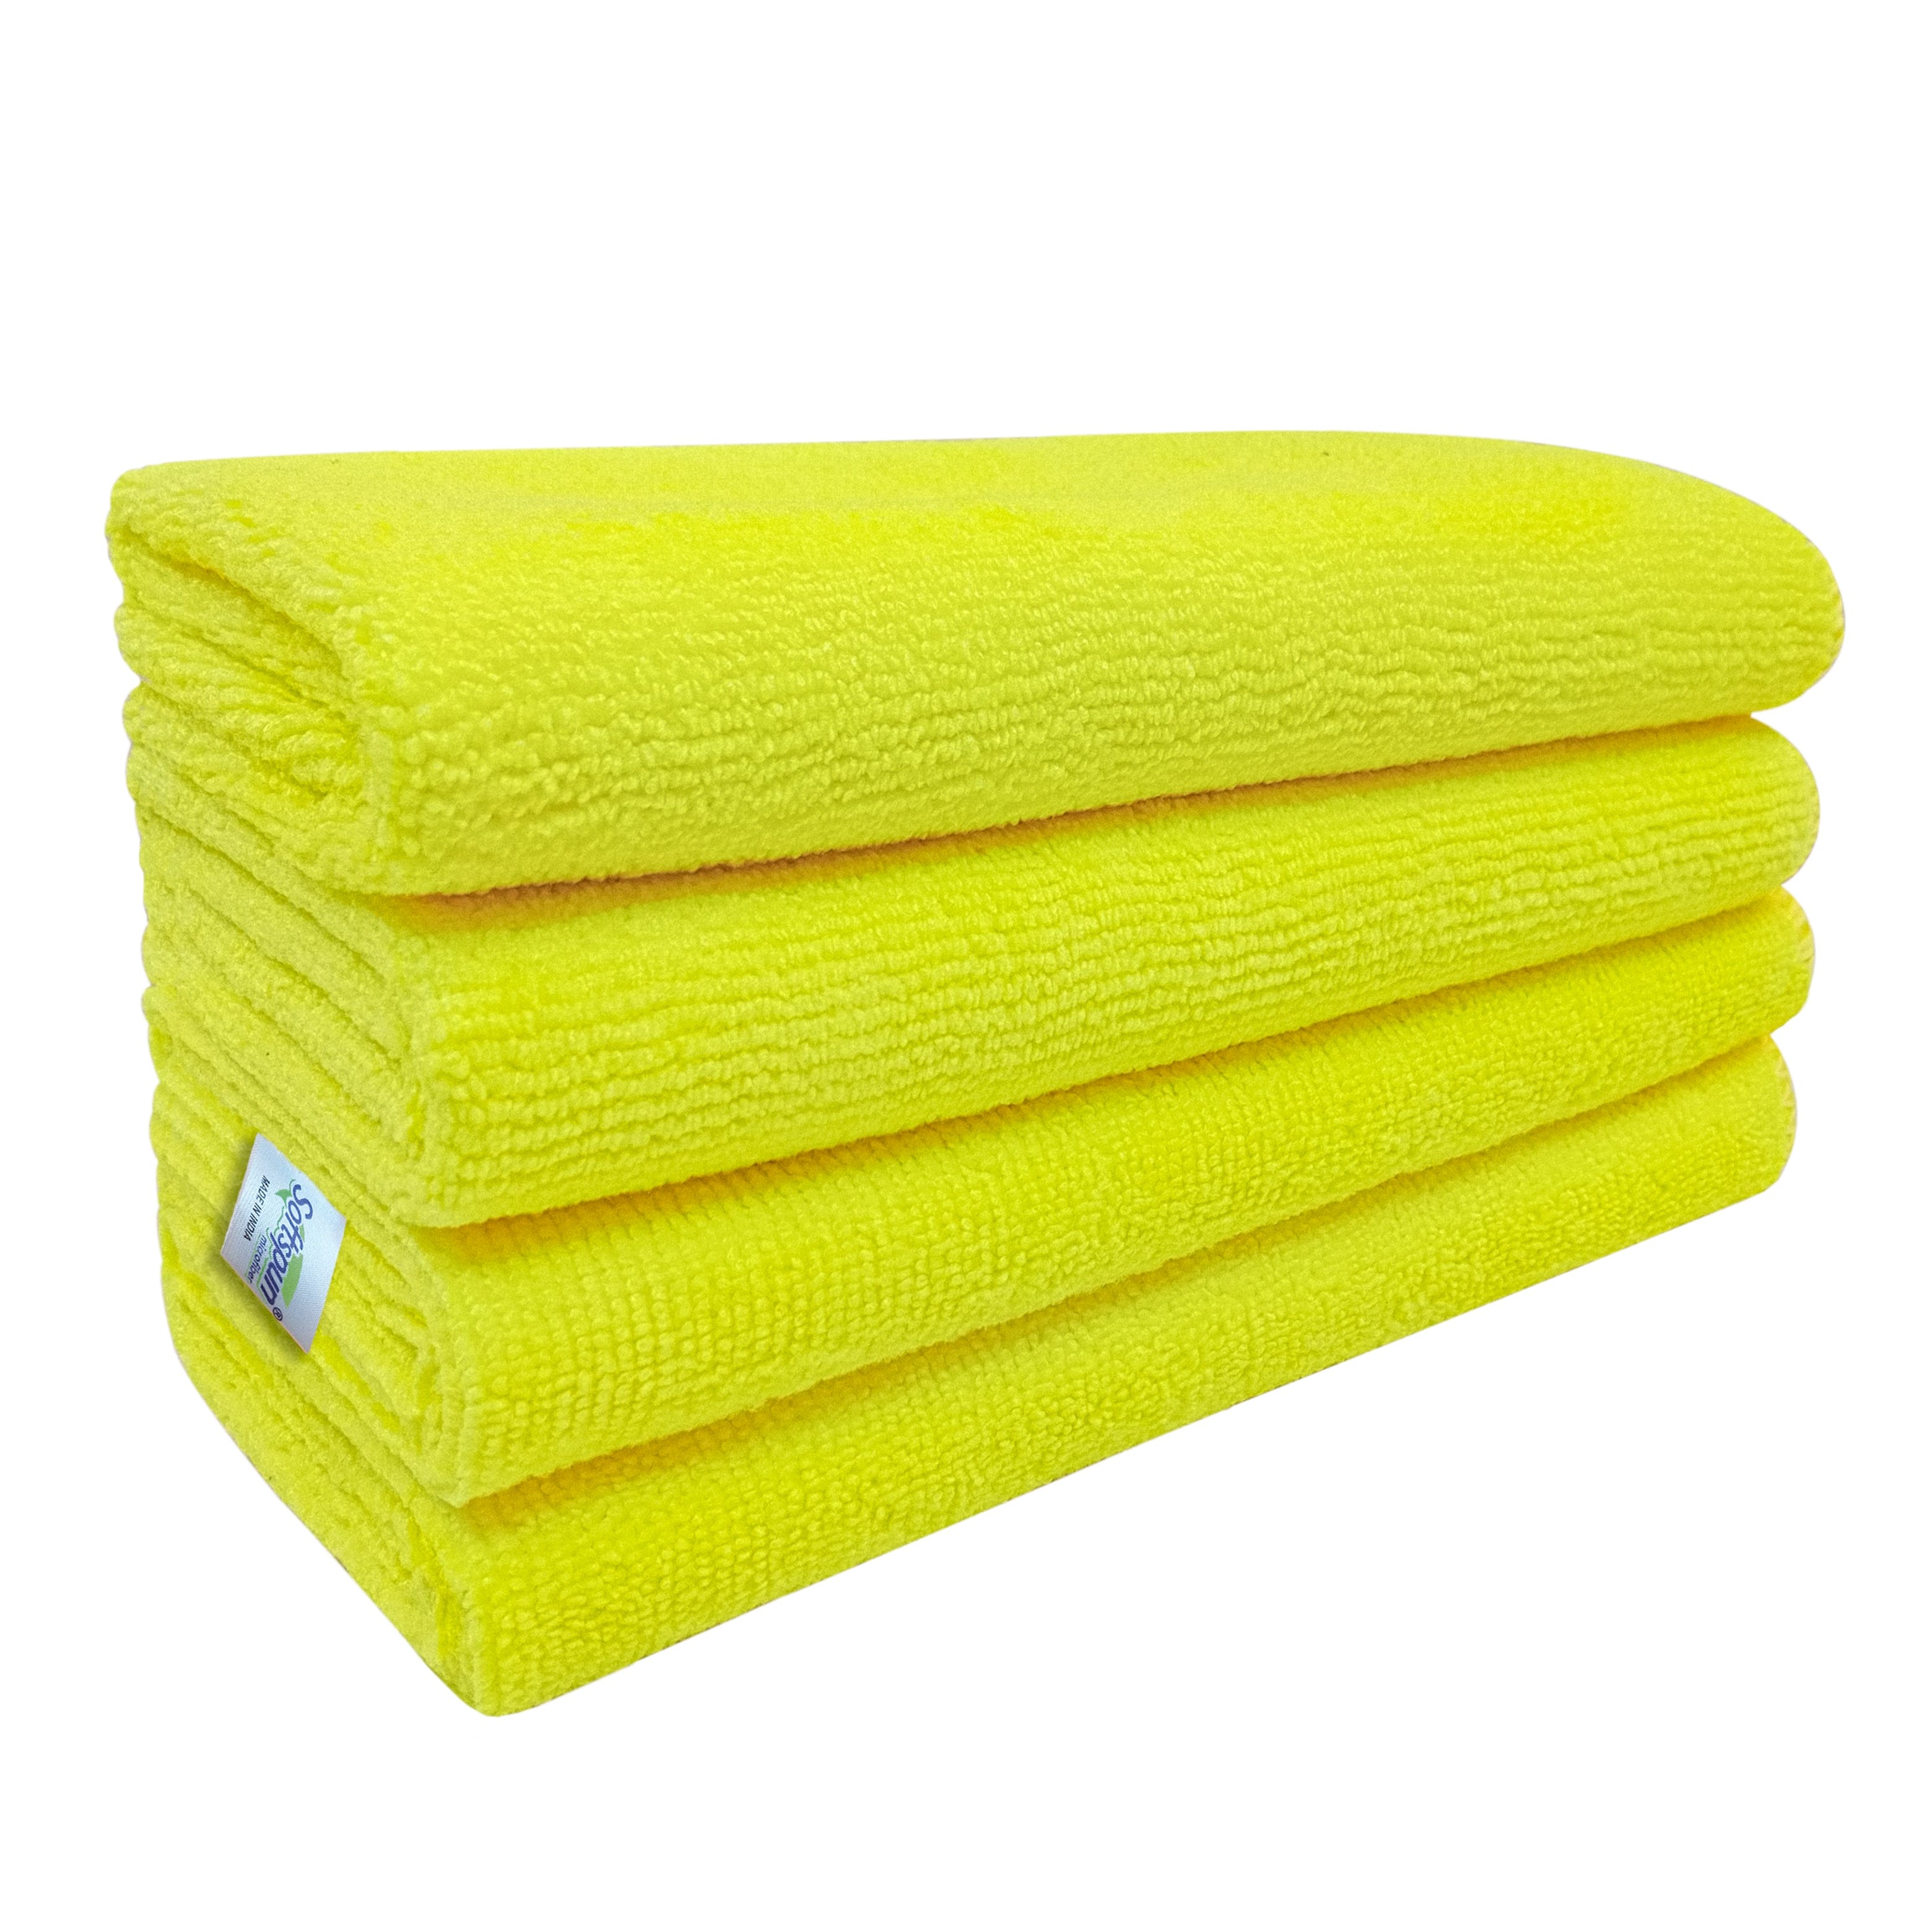 SOFTSPUN Microfiber Cleaning Cloths, 340 GSM Highly Absorbent, Lint and Streak Free, Multi - Purpose Wash Cloth for Kitchen, Car, Window, Stainless Steel, silverware.